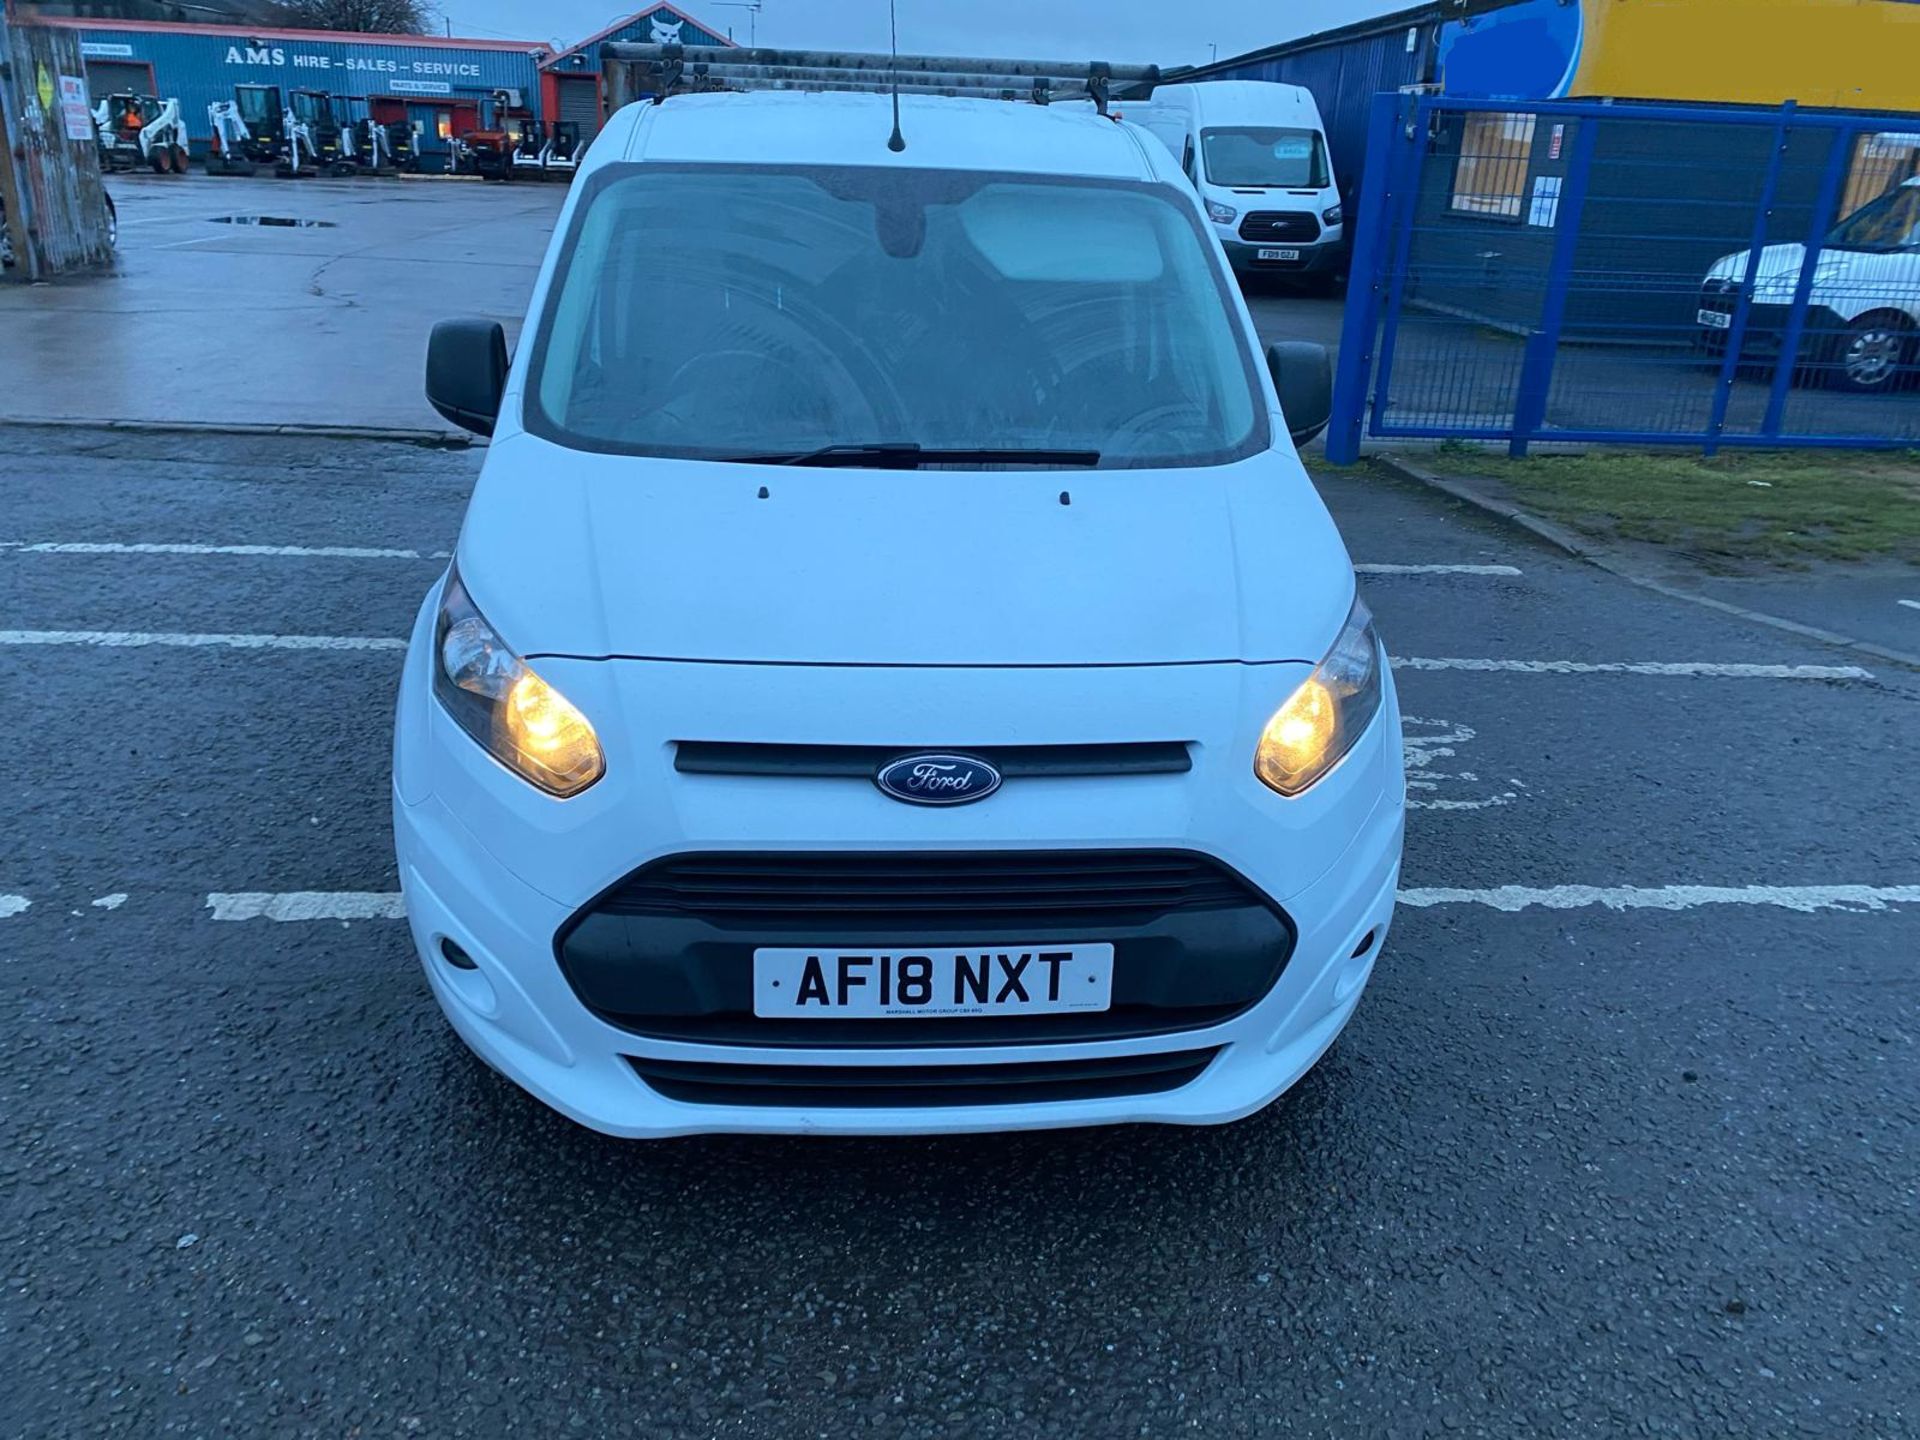 2018 18 FORD TRANSIT CONNECT TREND PAENL VAN - 128K MILES - EURO 6 - 3 SEATS - LWB - ROOF RACK. - Image 2 of 13